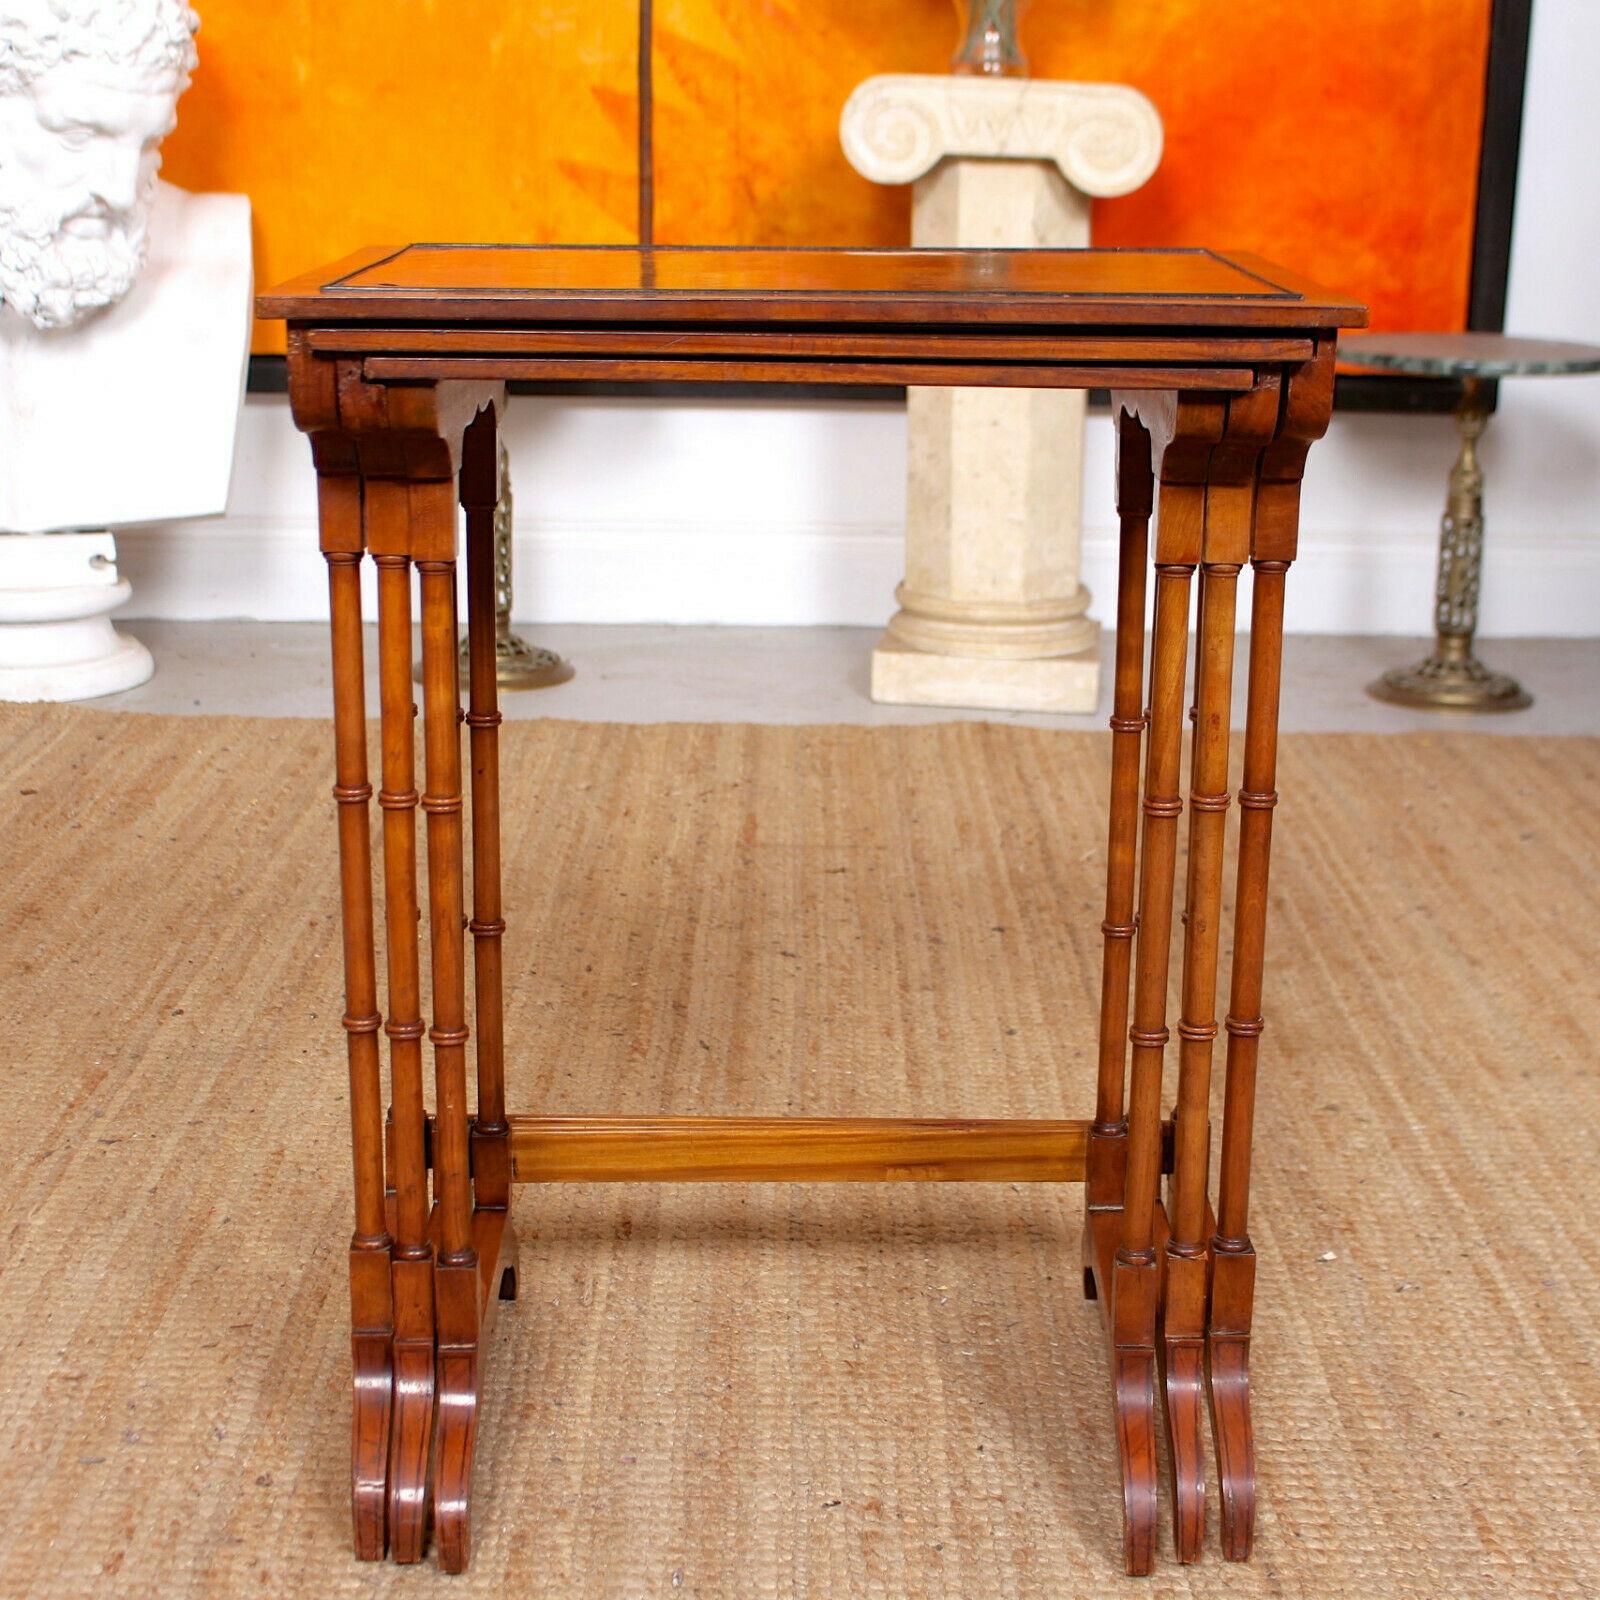 English Nest of Tables Satinwood Crossbanded 3 Side Tables Tall Georgian For Sale 6